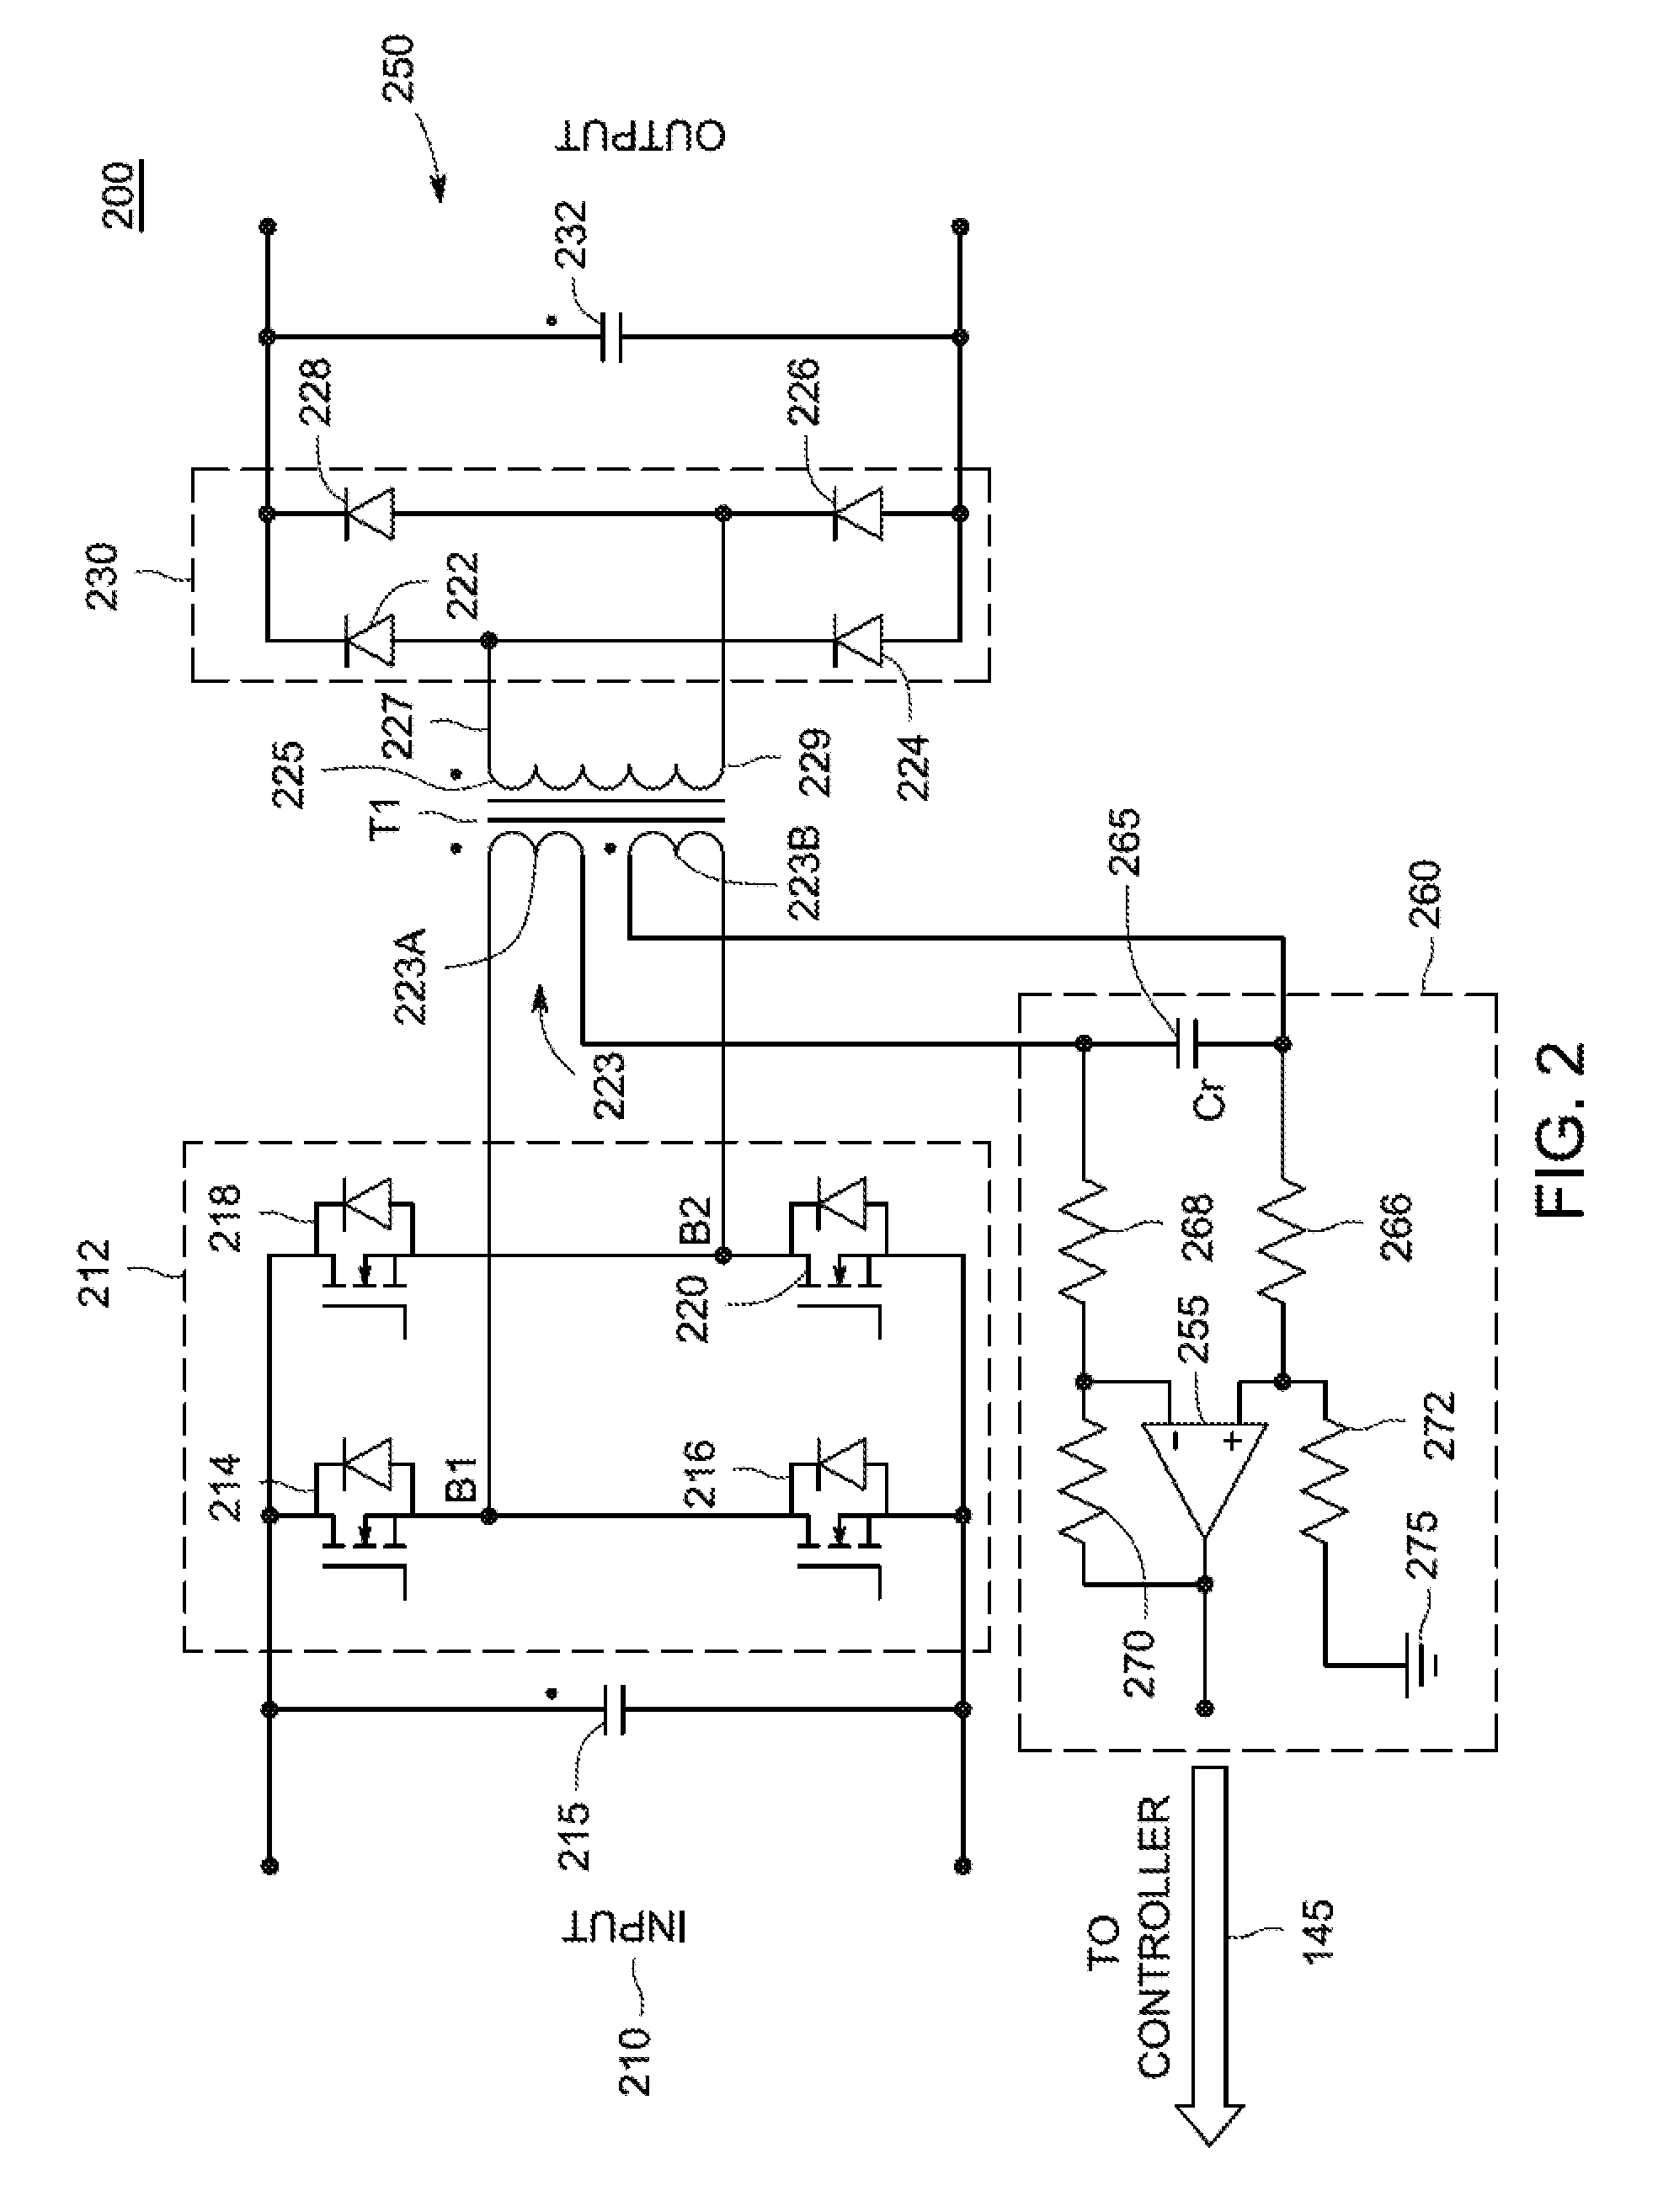 Method and apparatus for deriving current for control in a resonant power converter